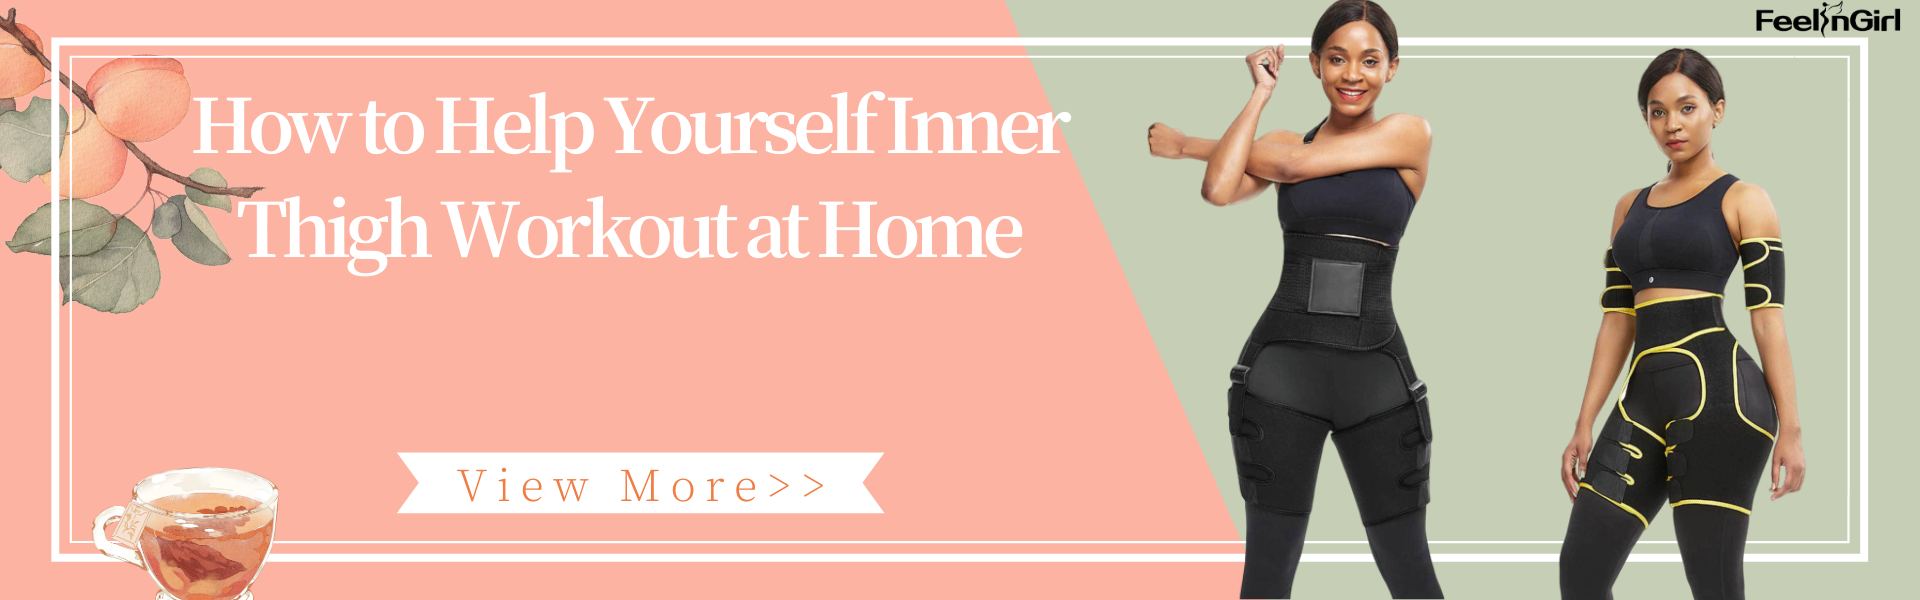 How to Help Yourself Inner Thigh Workout at Home